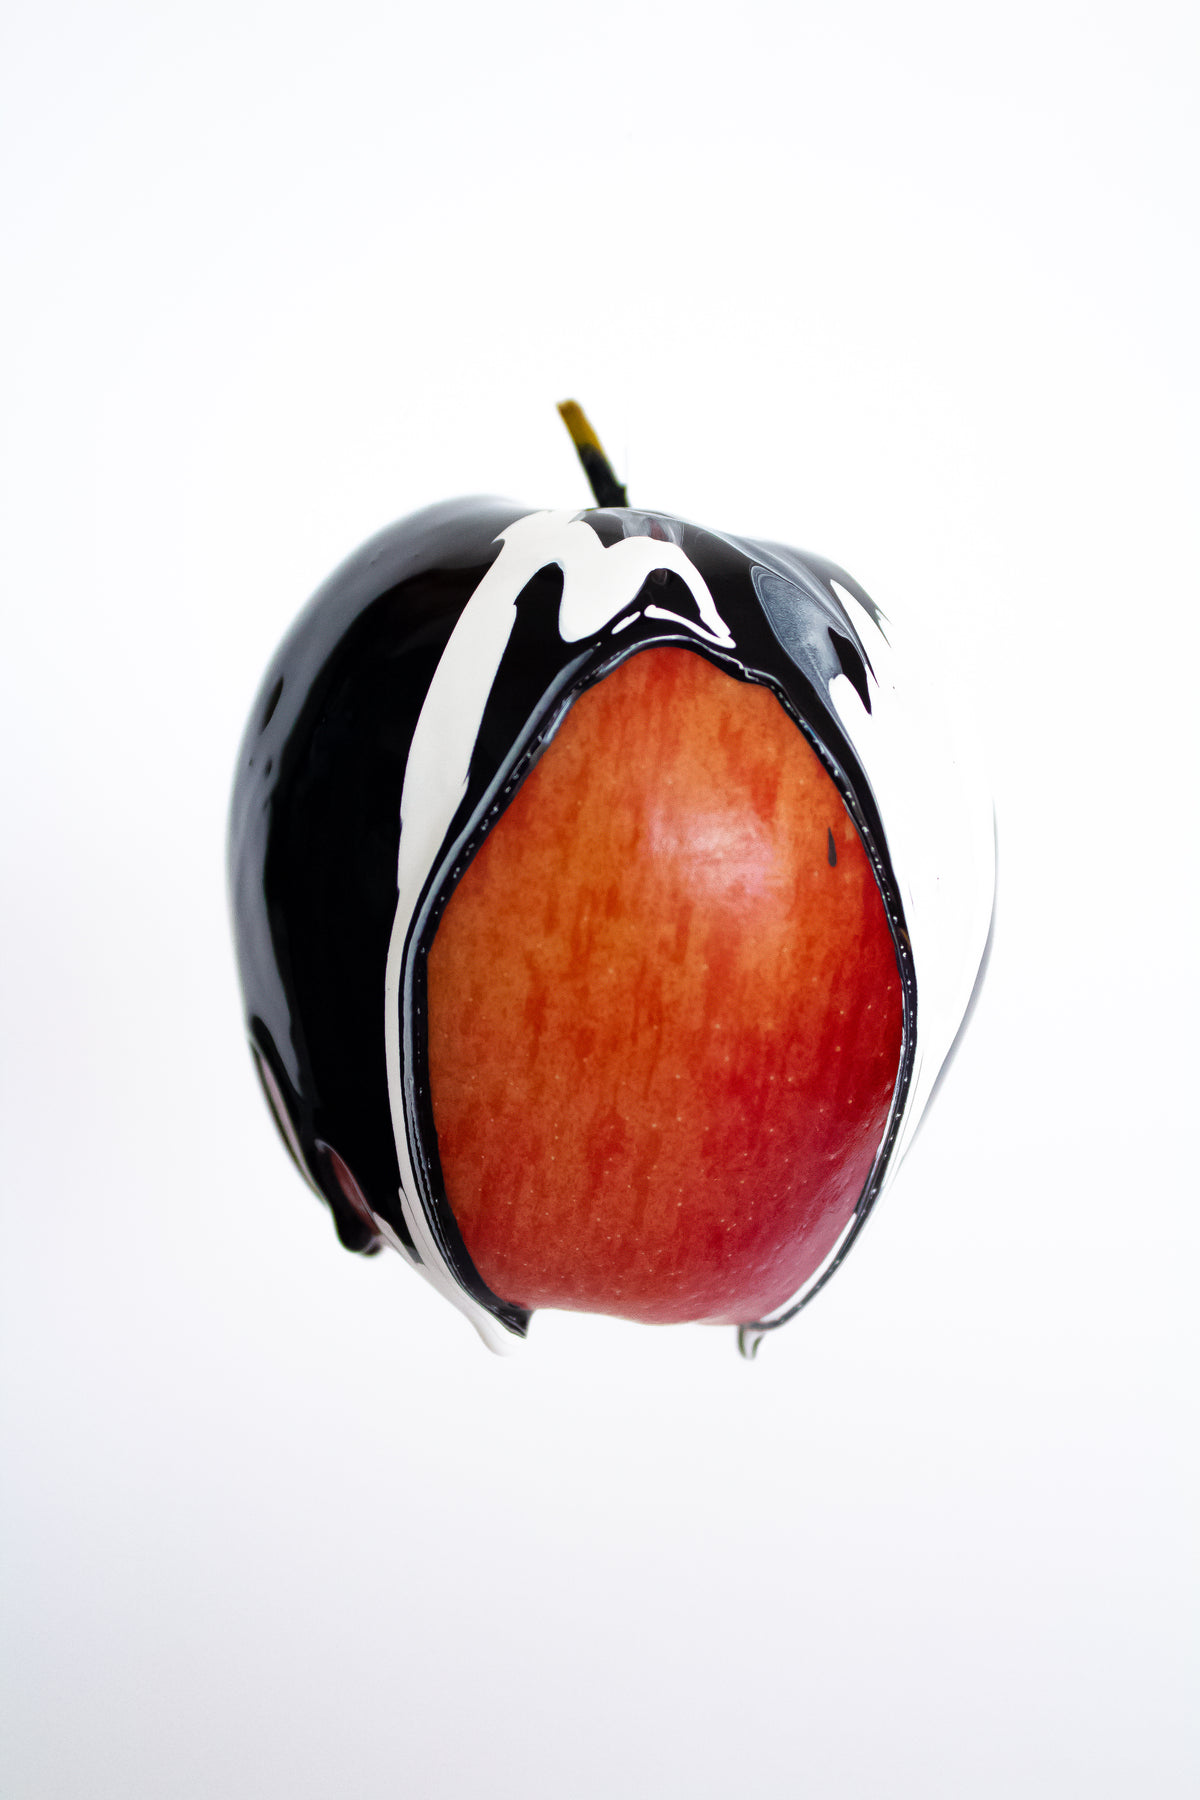 black and white paint on red apple